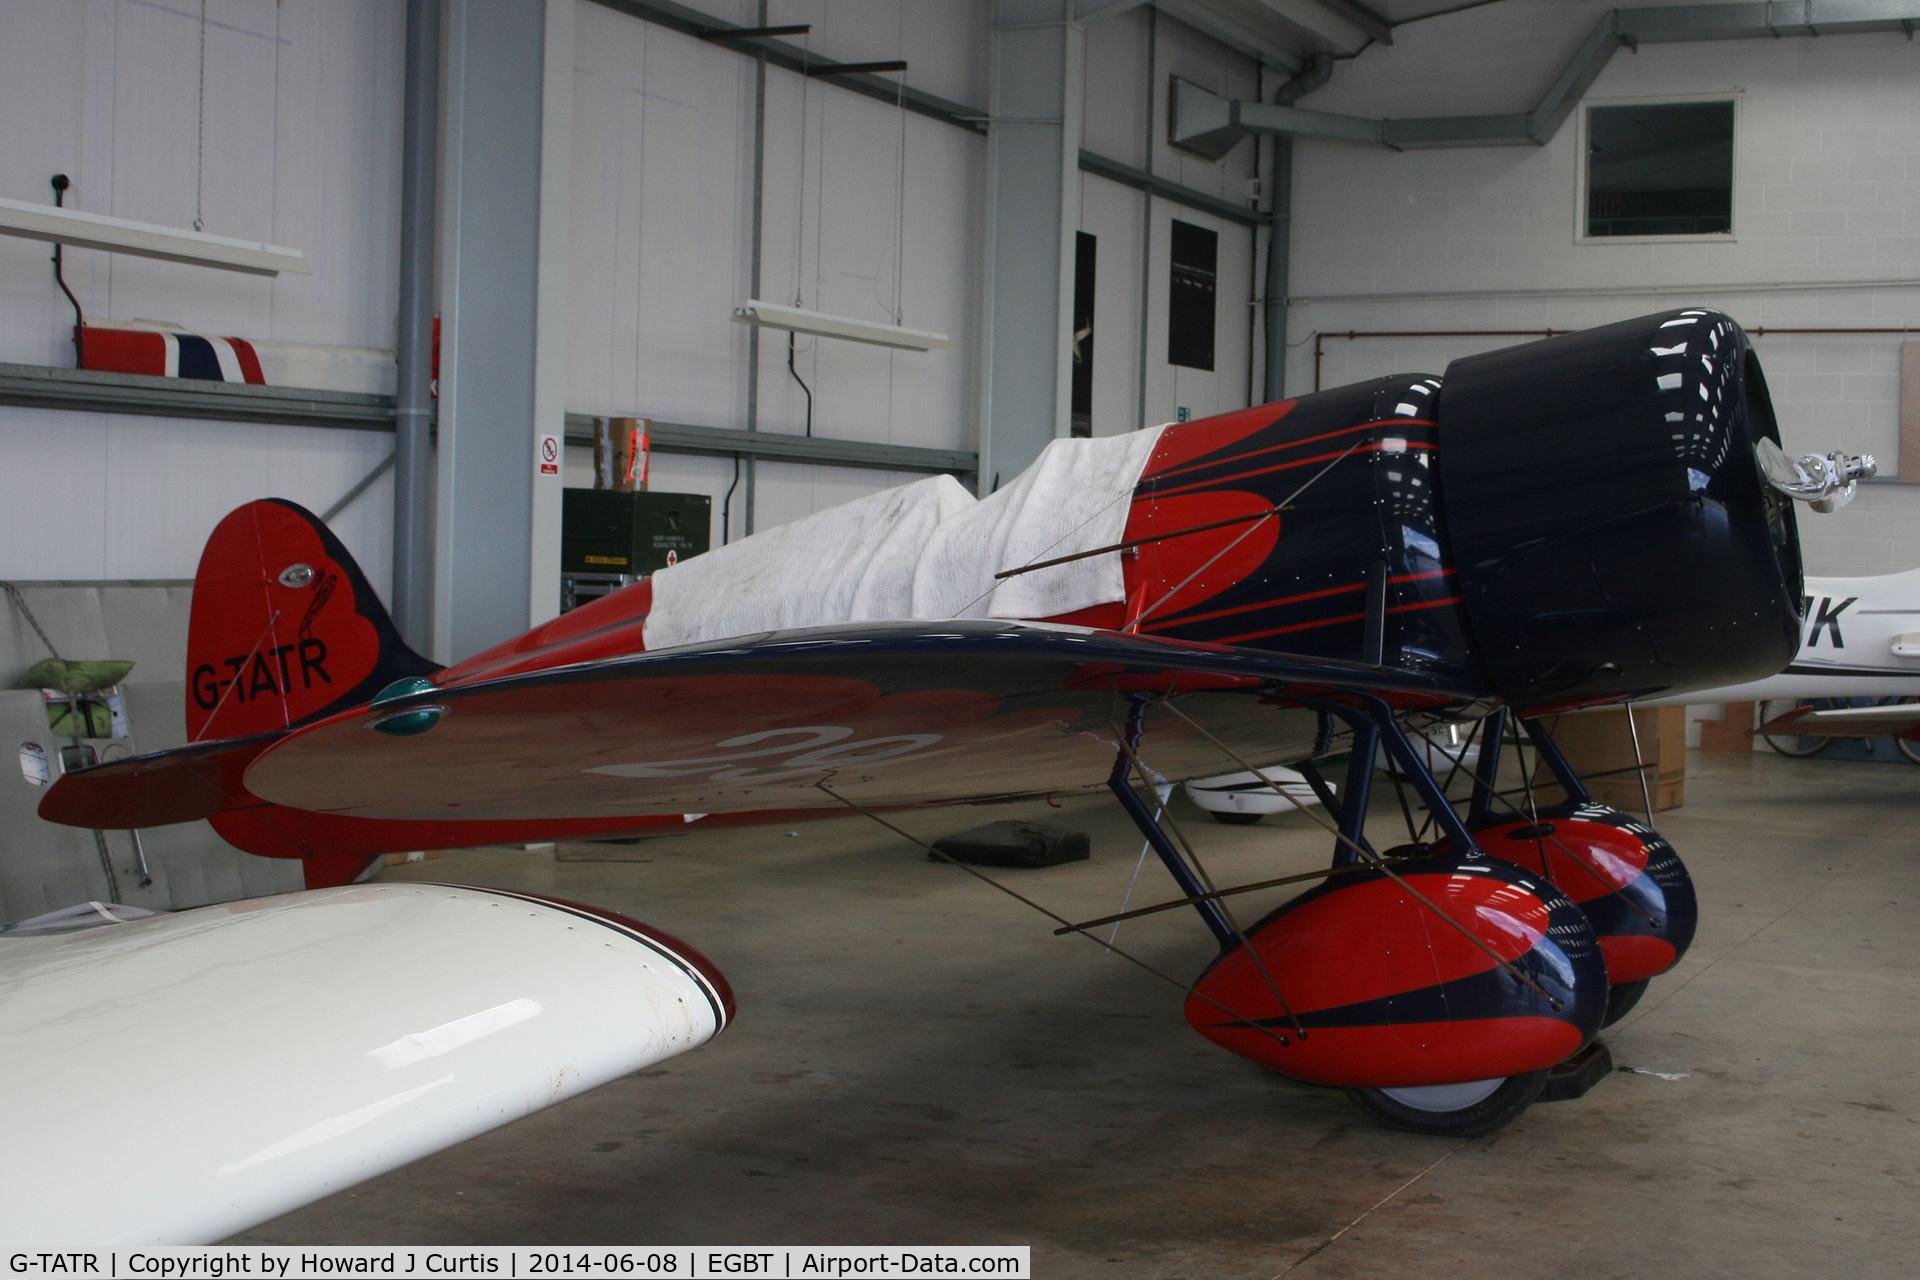 G-TATR, 2012 Travel Air Type R Racer Replica C/N LAA 362-14892, Privately owned